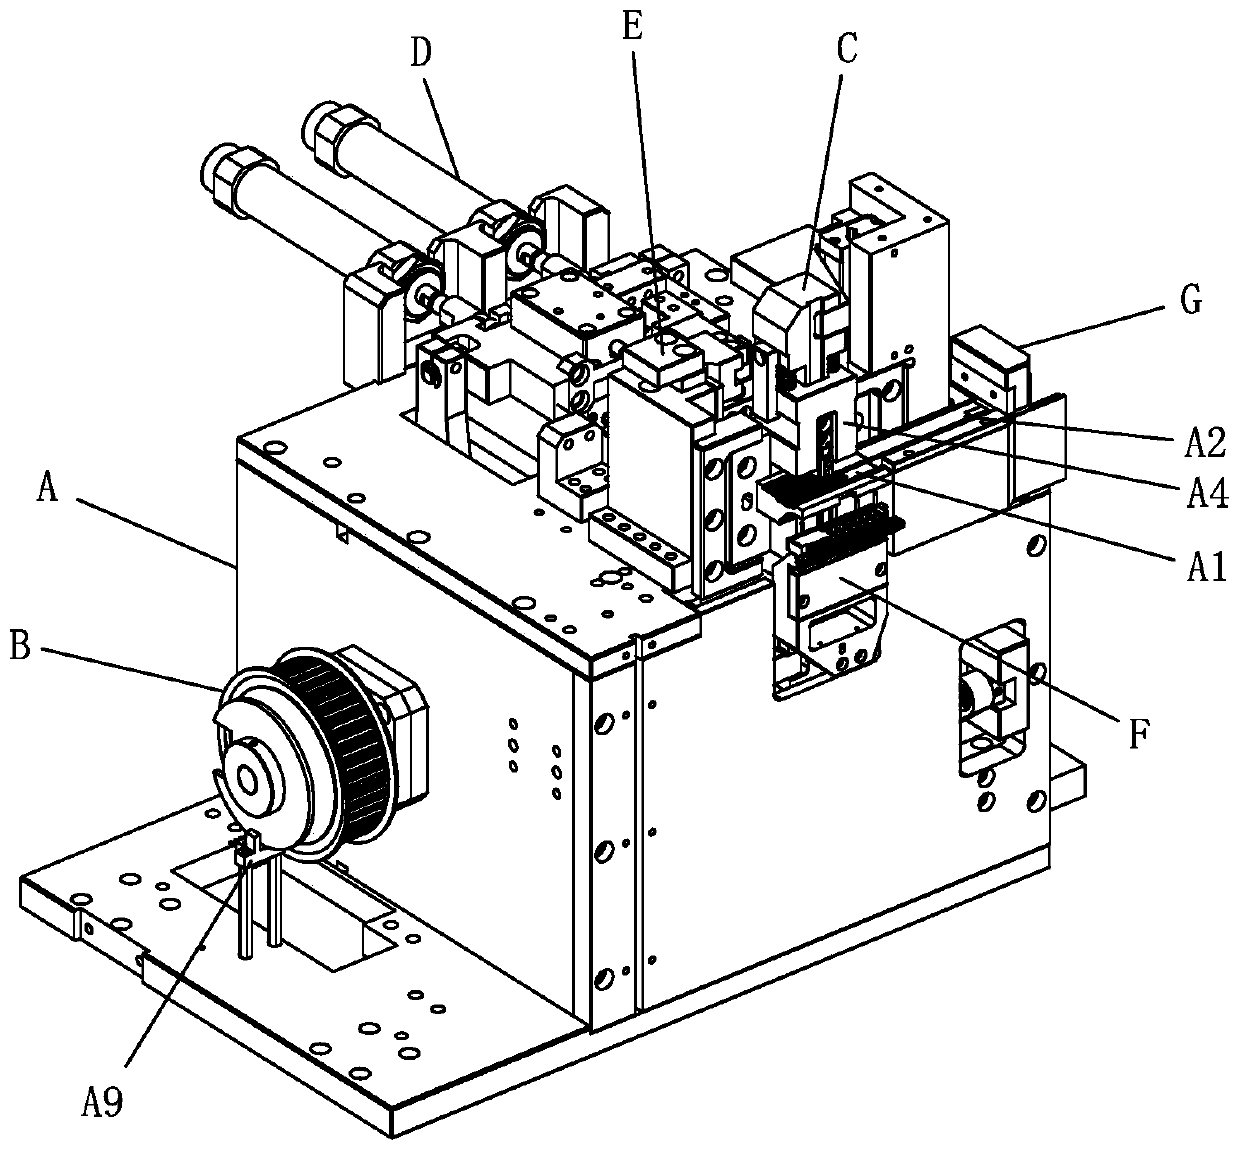 A connector cam assembly mechanism